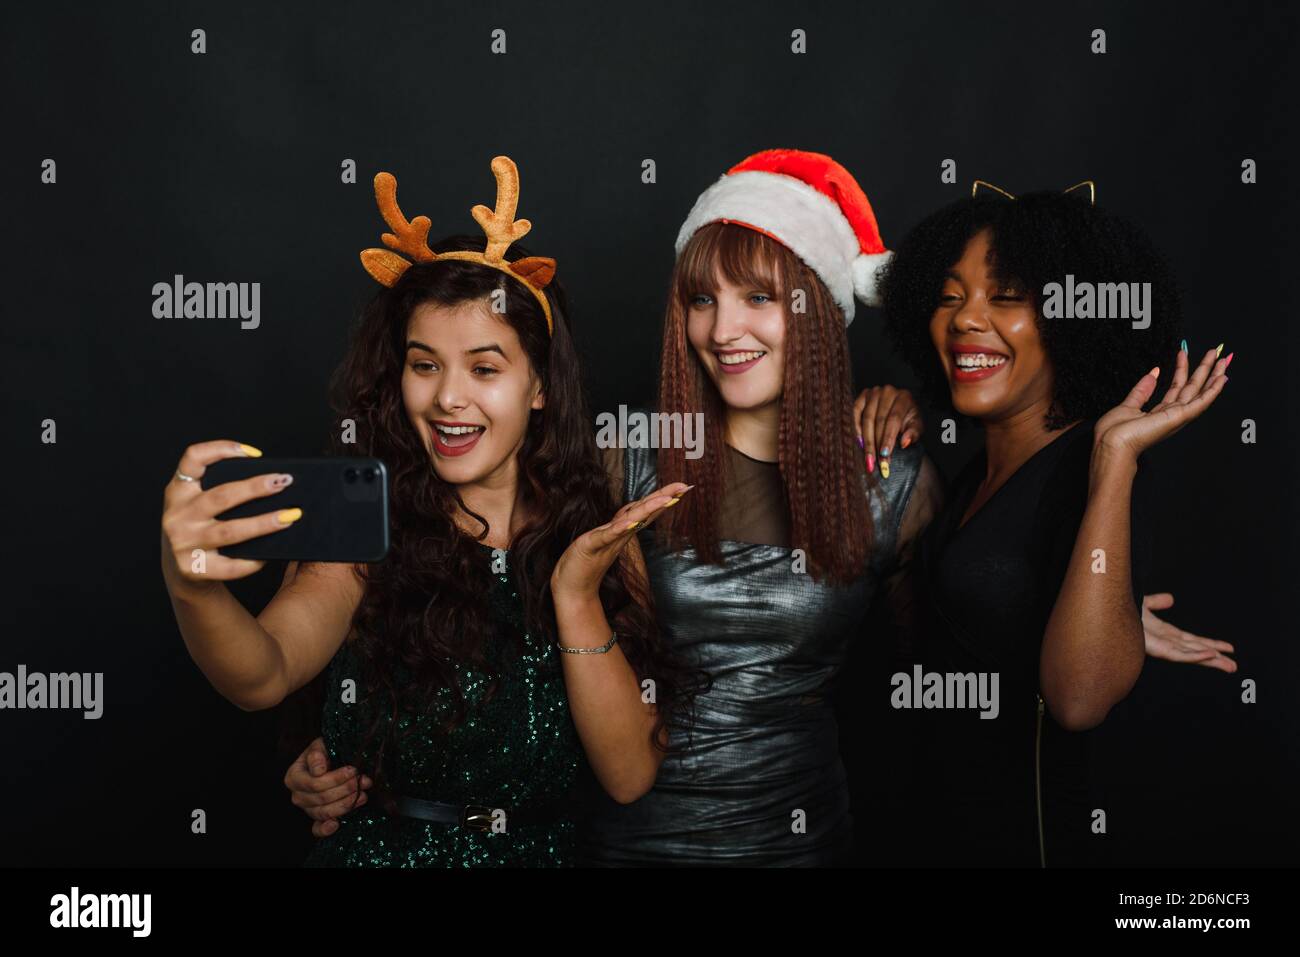 Group of friends at club making selfie and having fun. Cute young women posing with kissing face expression. Relaxed young women making selfie with friend on dark background during christmas celebration. Stock Photo